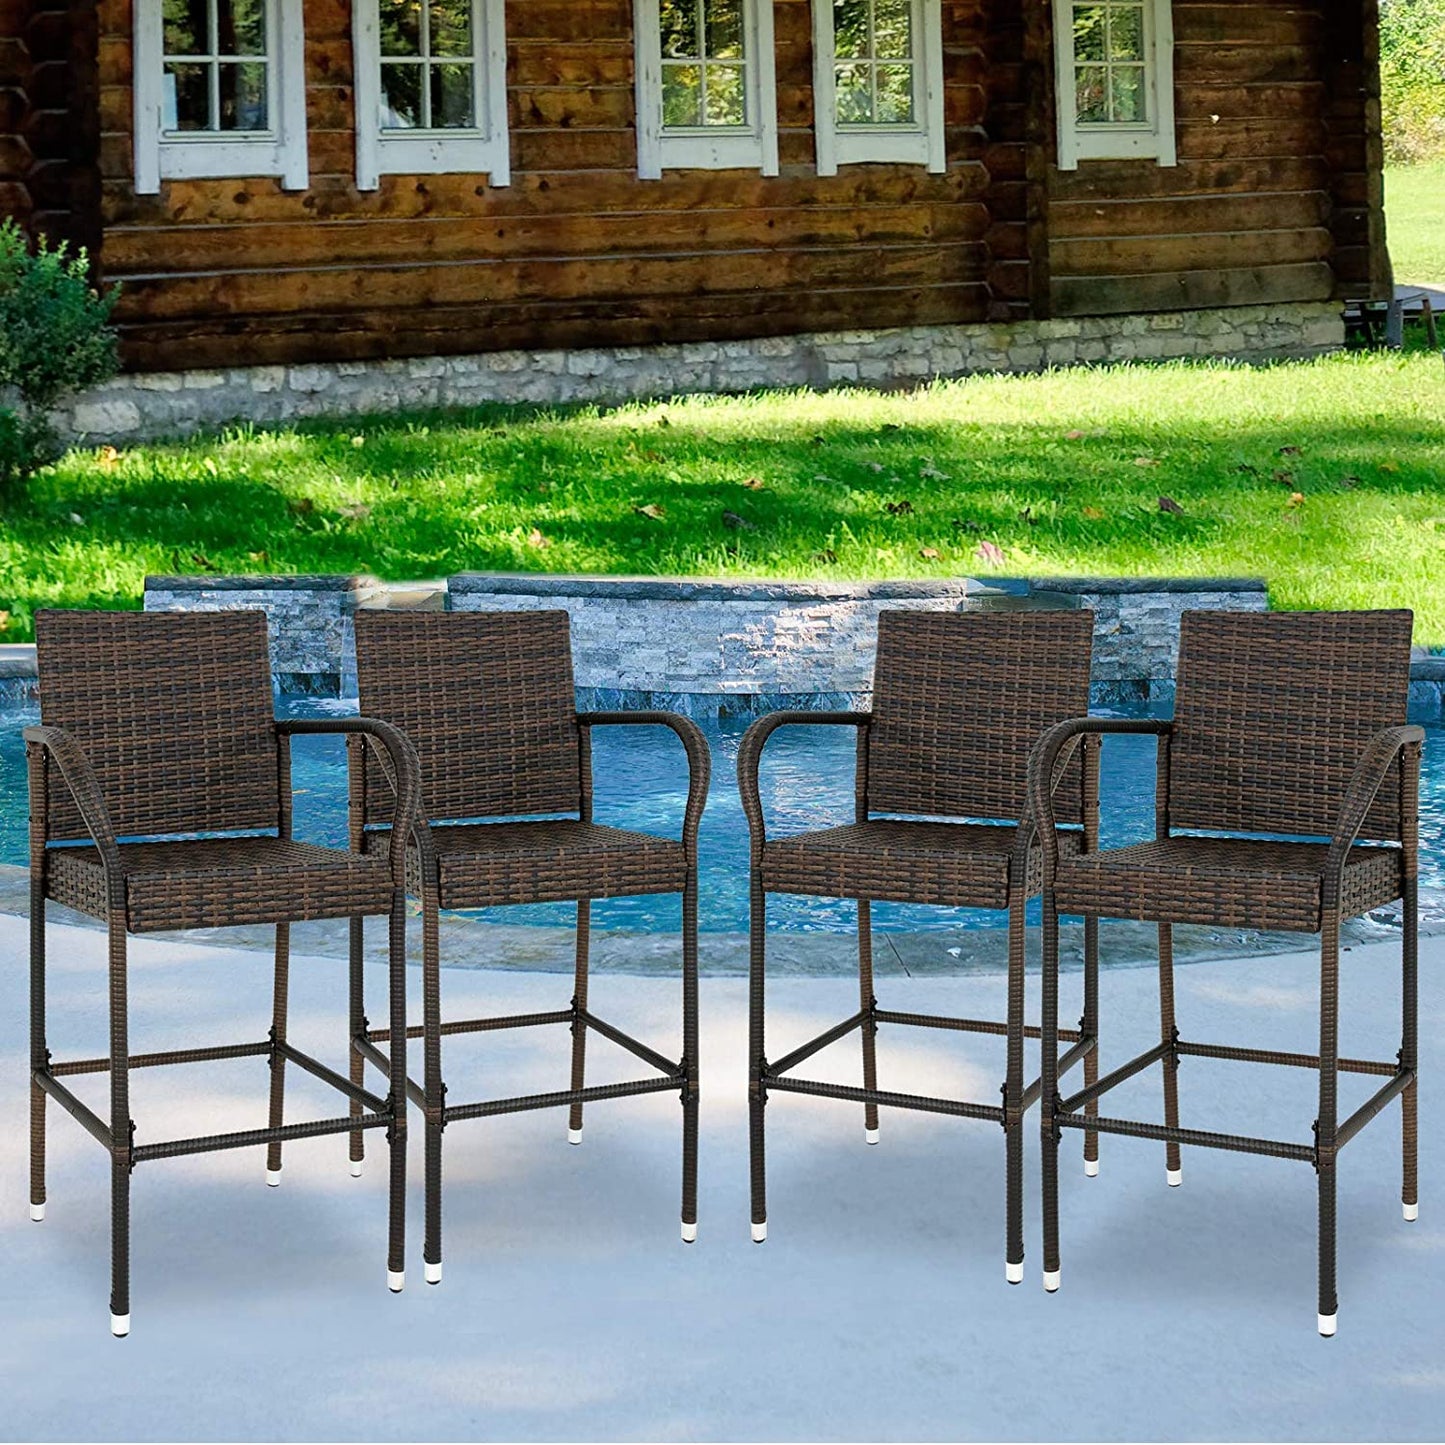 Set of 4 Wicker Barstool All Weather Dining Chairs Outdoor Patio Furniture Wicker Chairs Bar Stool with Armrest